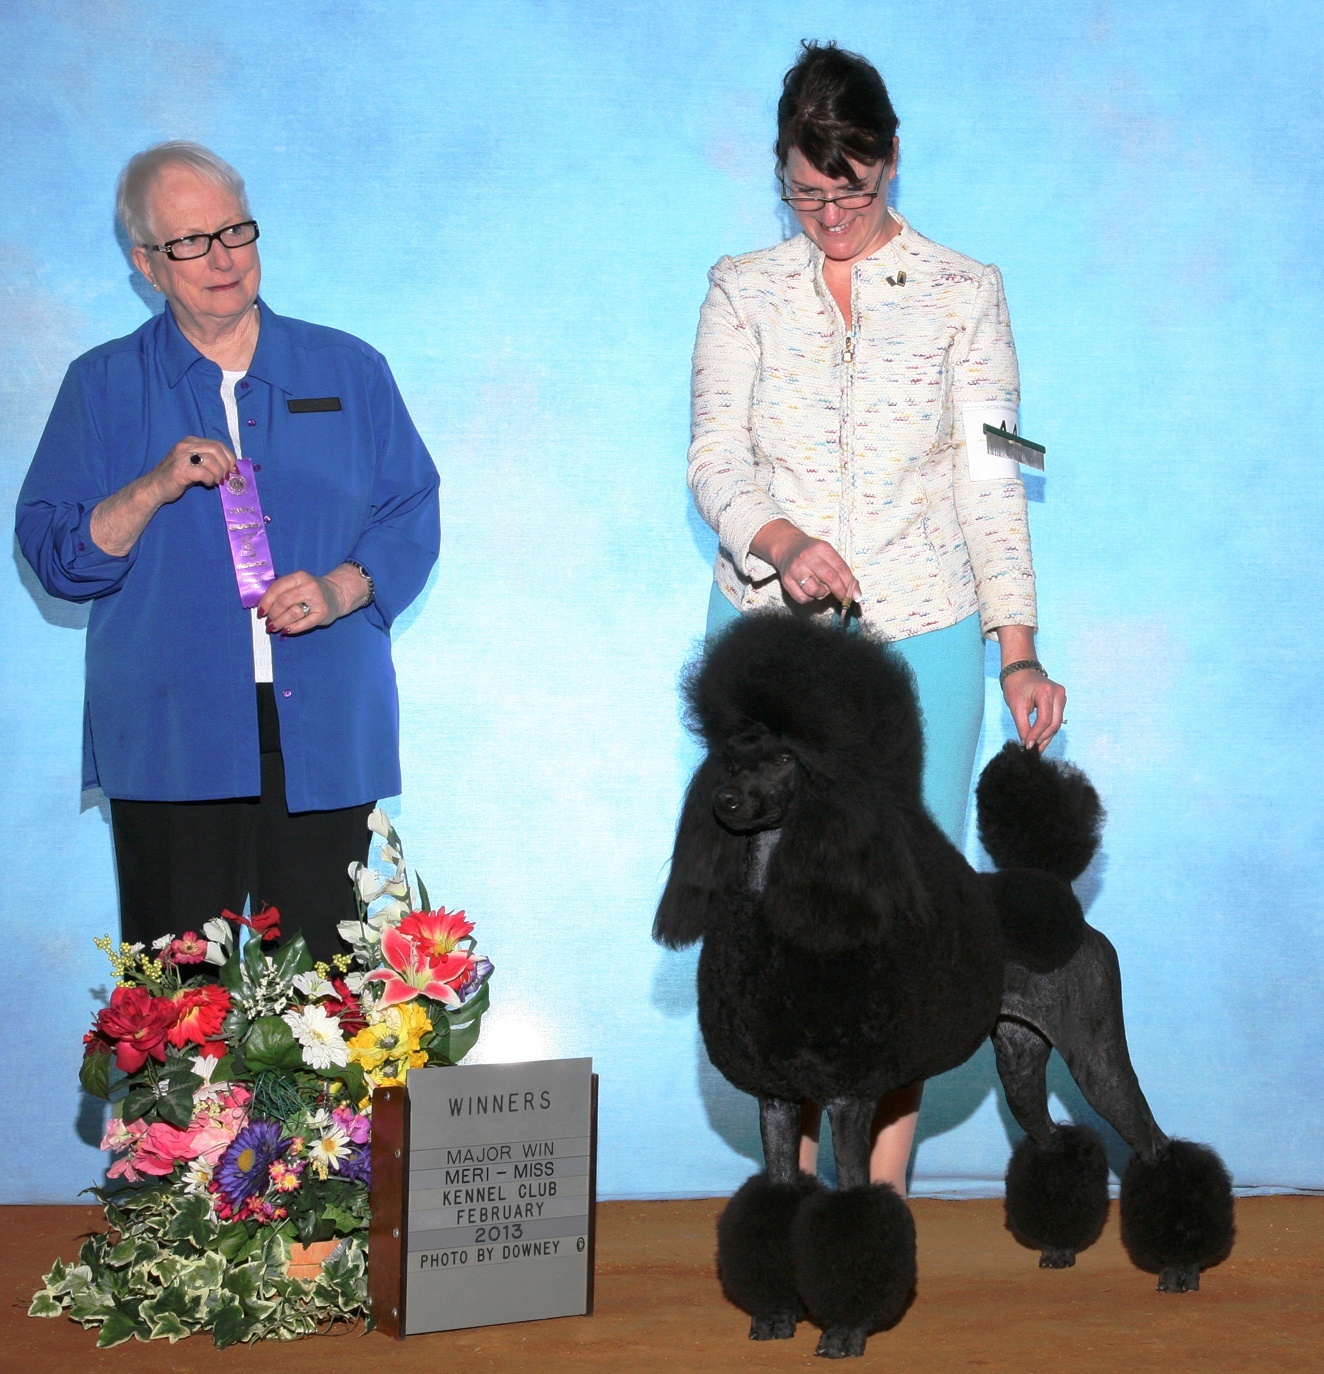 Here is Cali, pictured with handler Sarah Perchick,  winning a 5 point major under Mrs. Kathleen Grosso